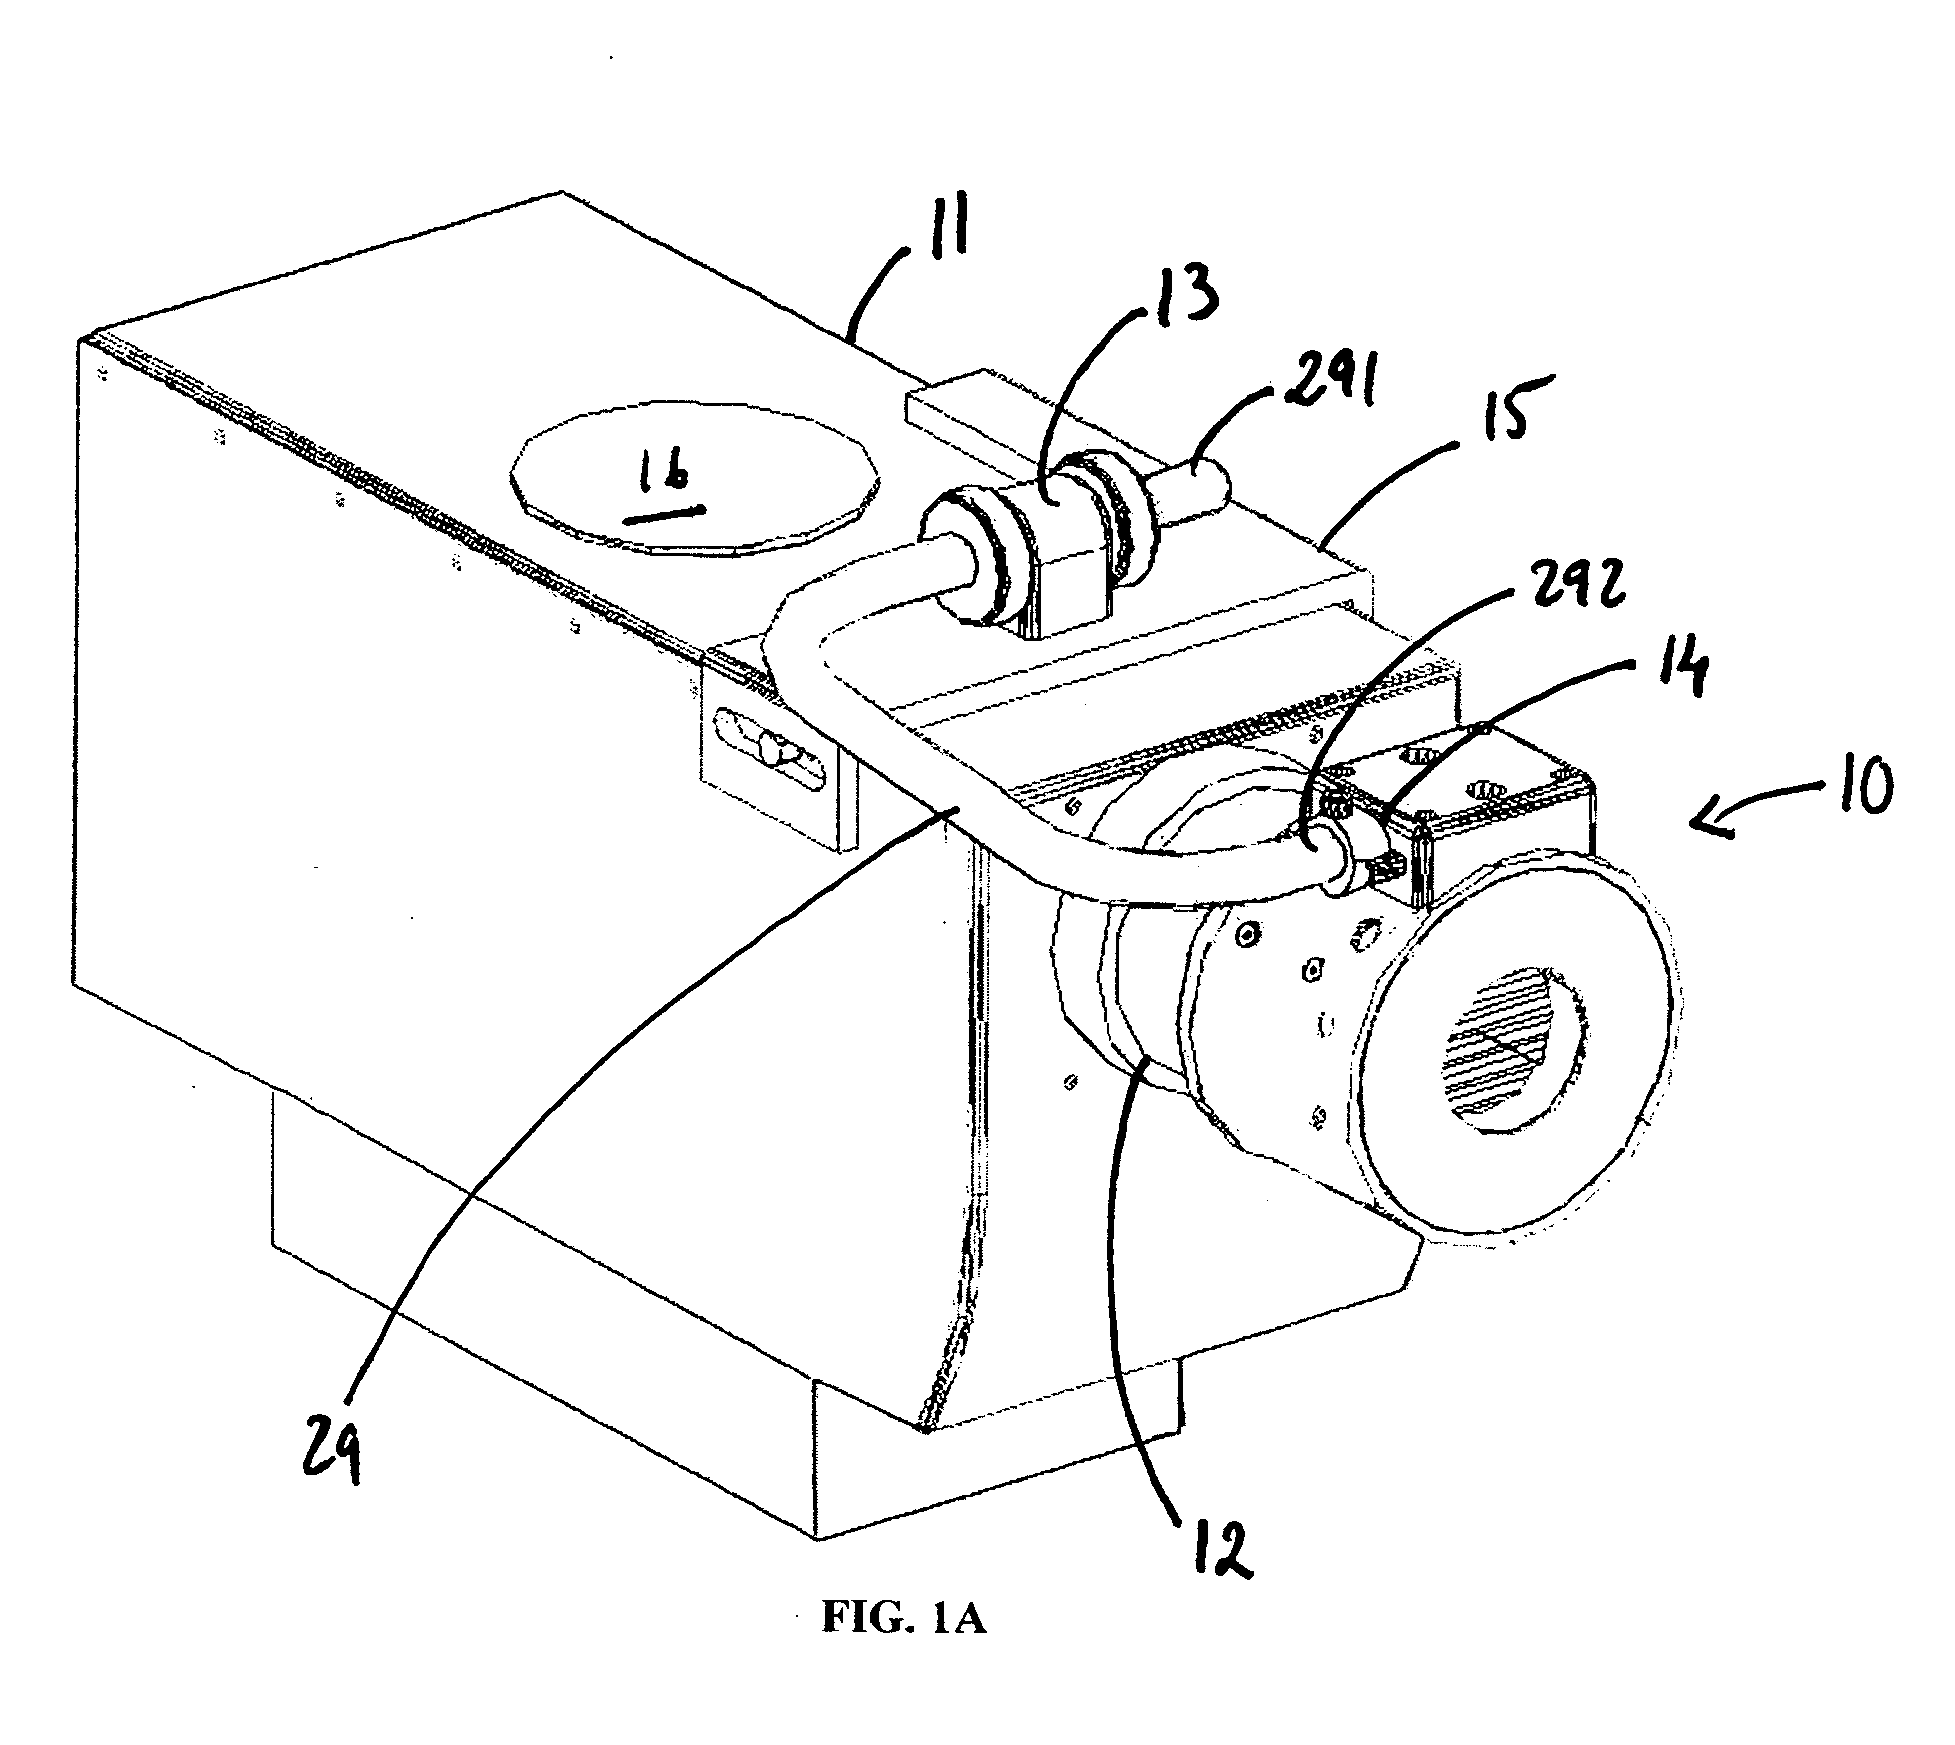 Integrated black body and lens cap assembly and methods for calibration of infrared cameras using same